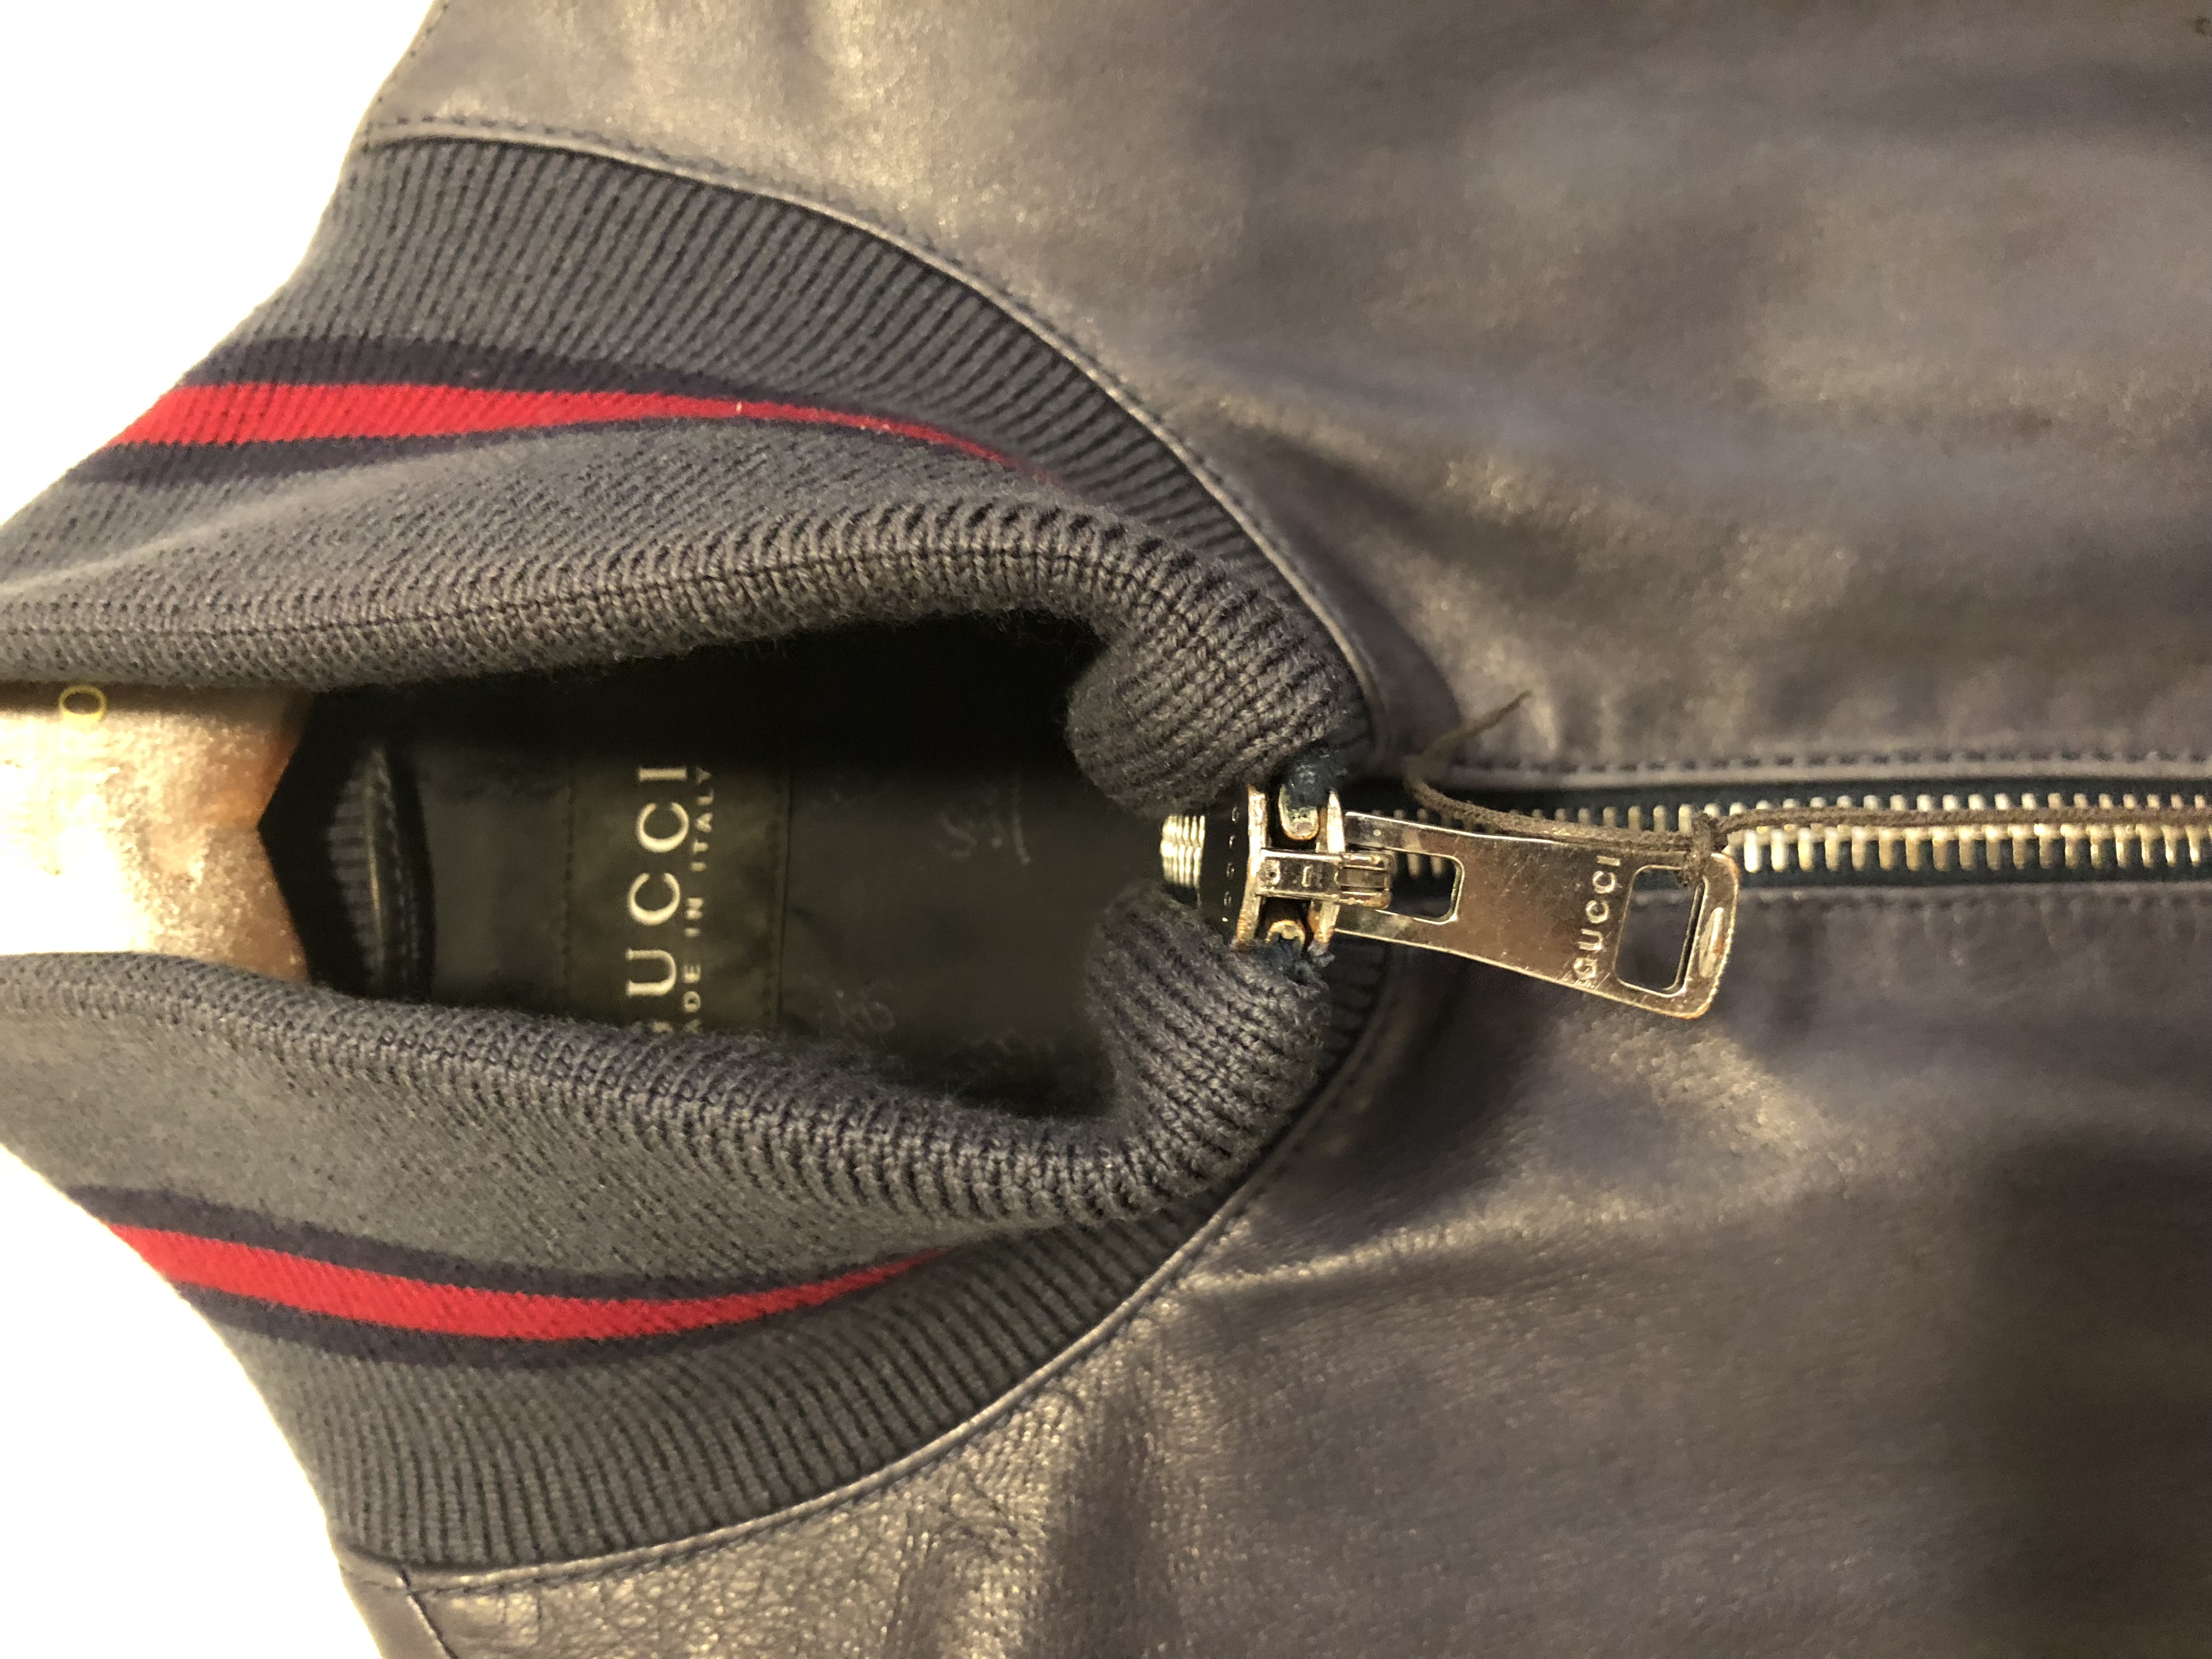 WA Gucci leather jacket and Tom Ford harrington jacket - ClubLexus - Lexus  Forum Discussion